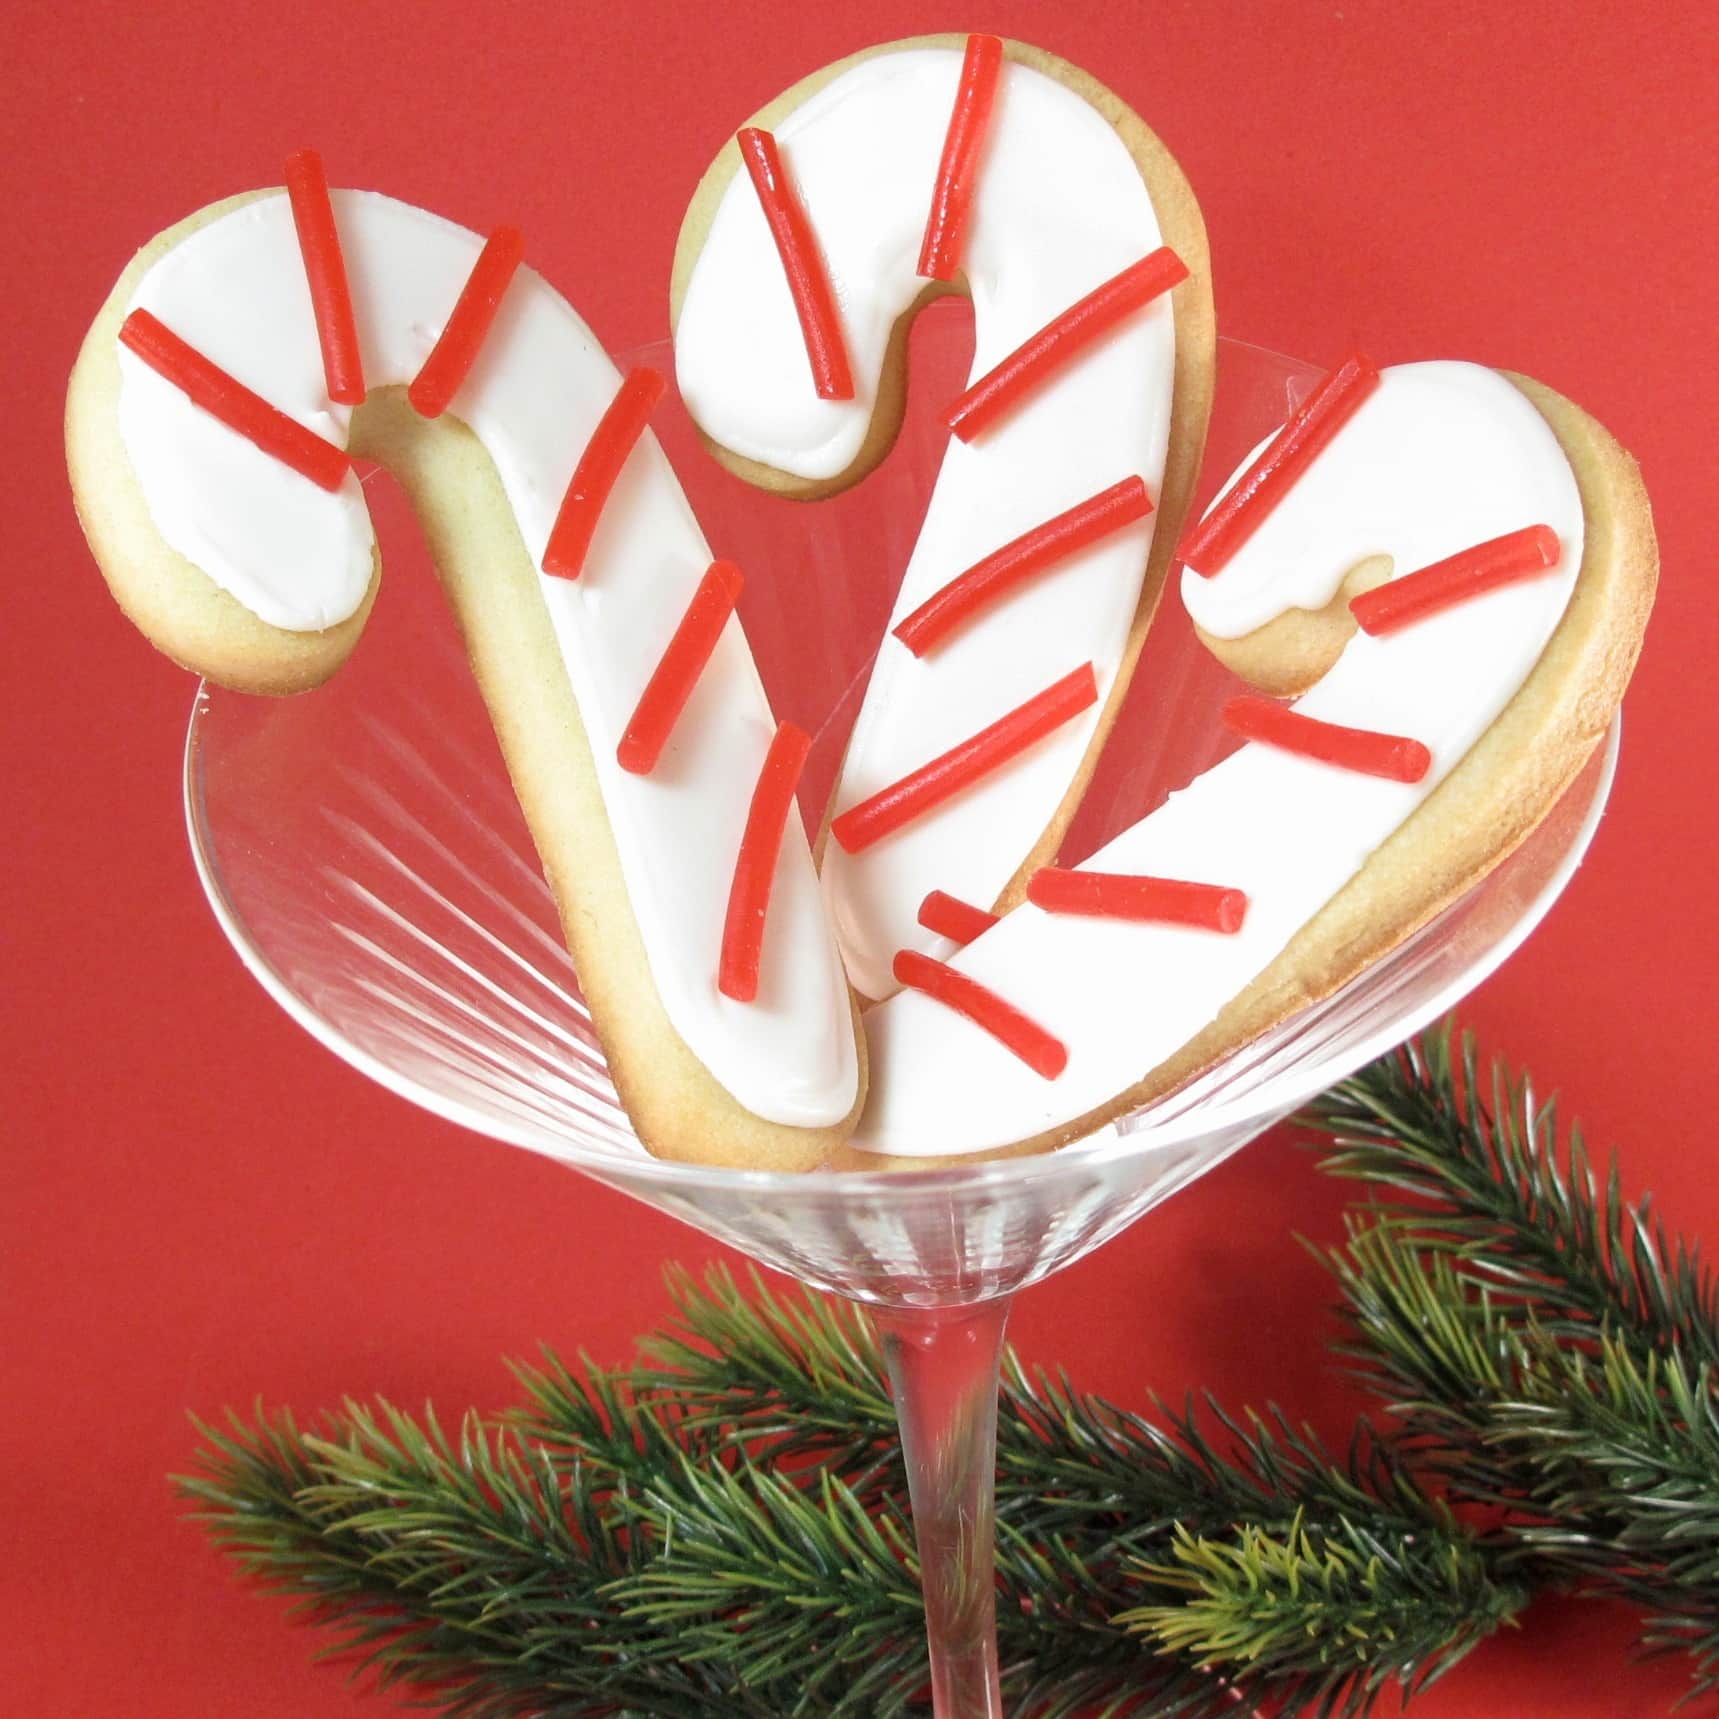 candy cane cookies for Christmas 